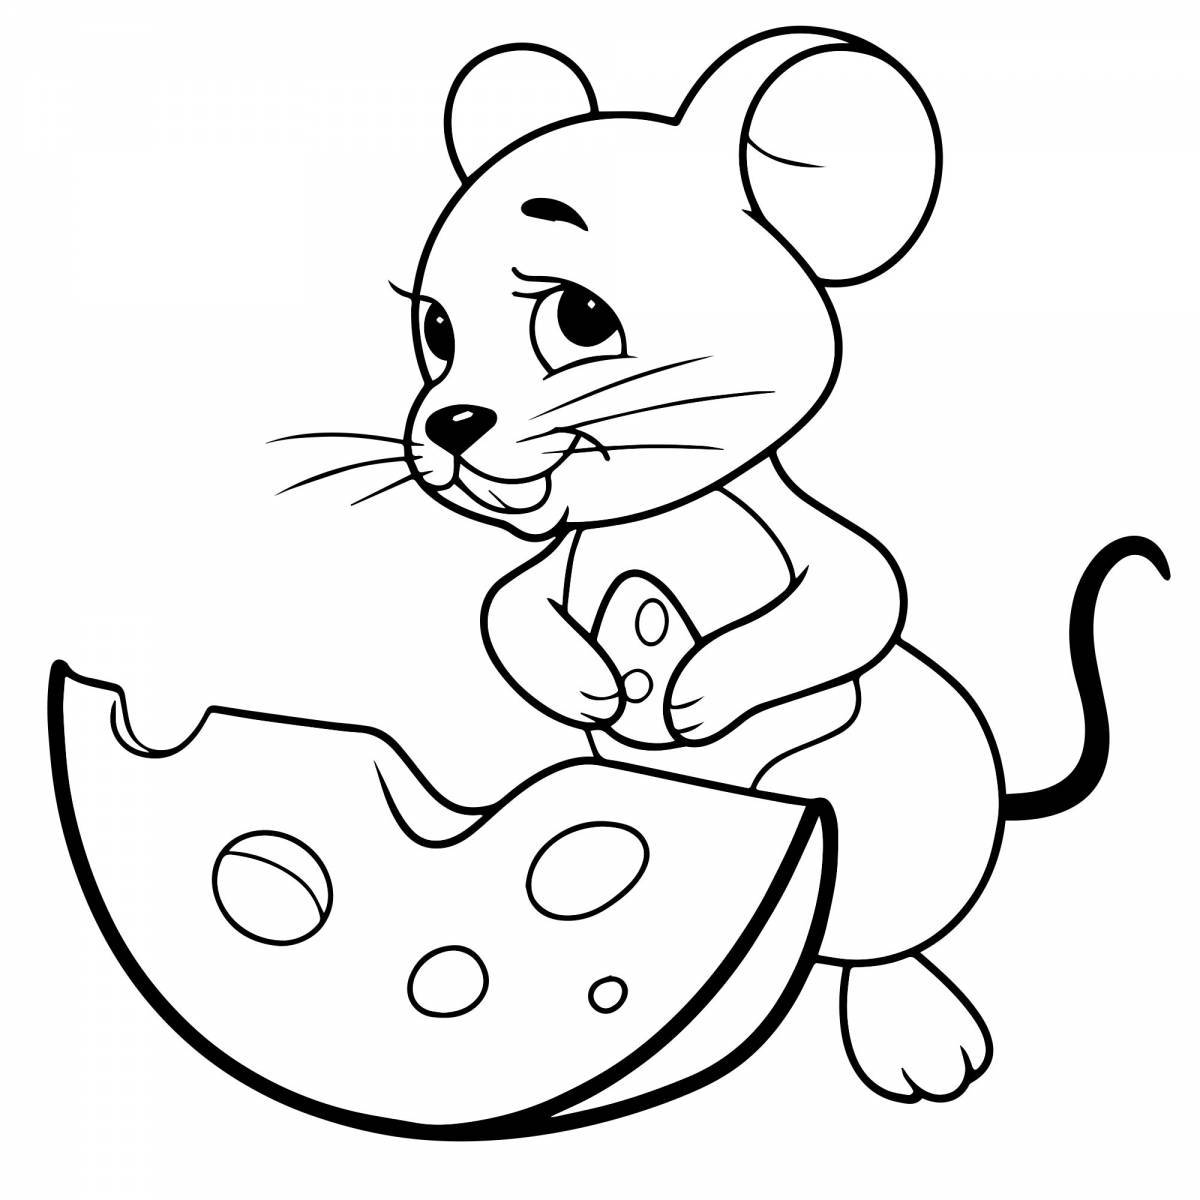 Gorgeous mouse coloring book for kids